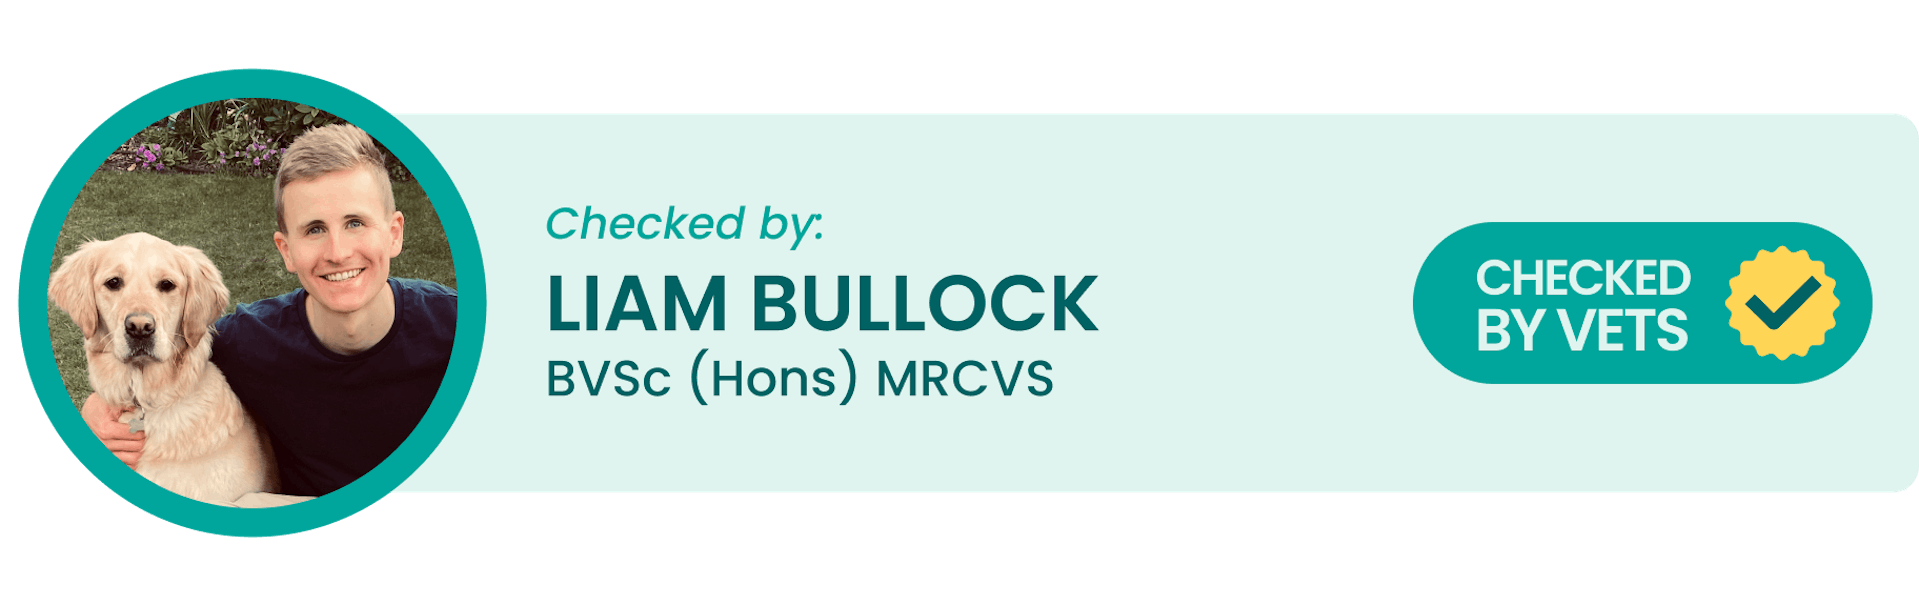 Checked by Vets - Liam Bullock